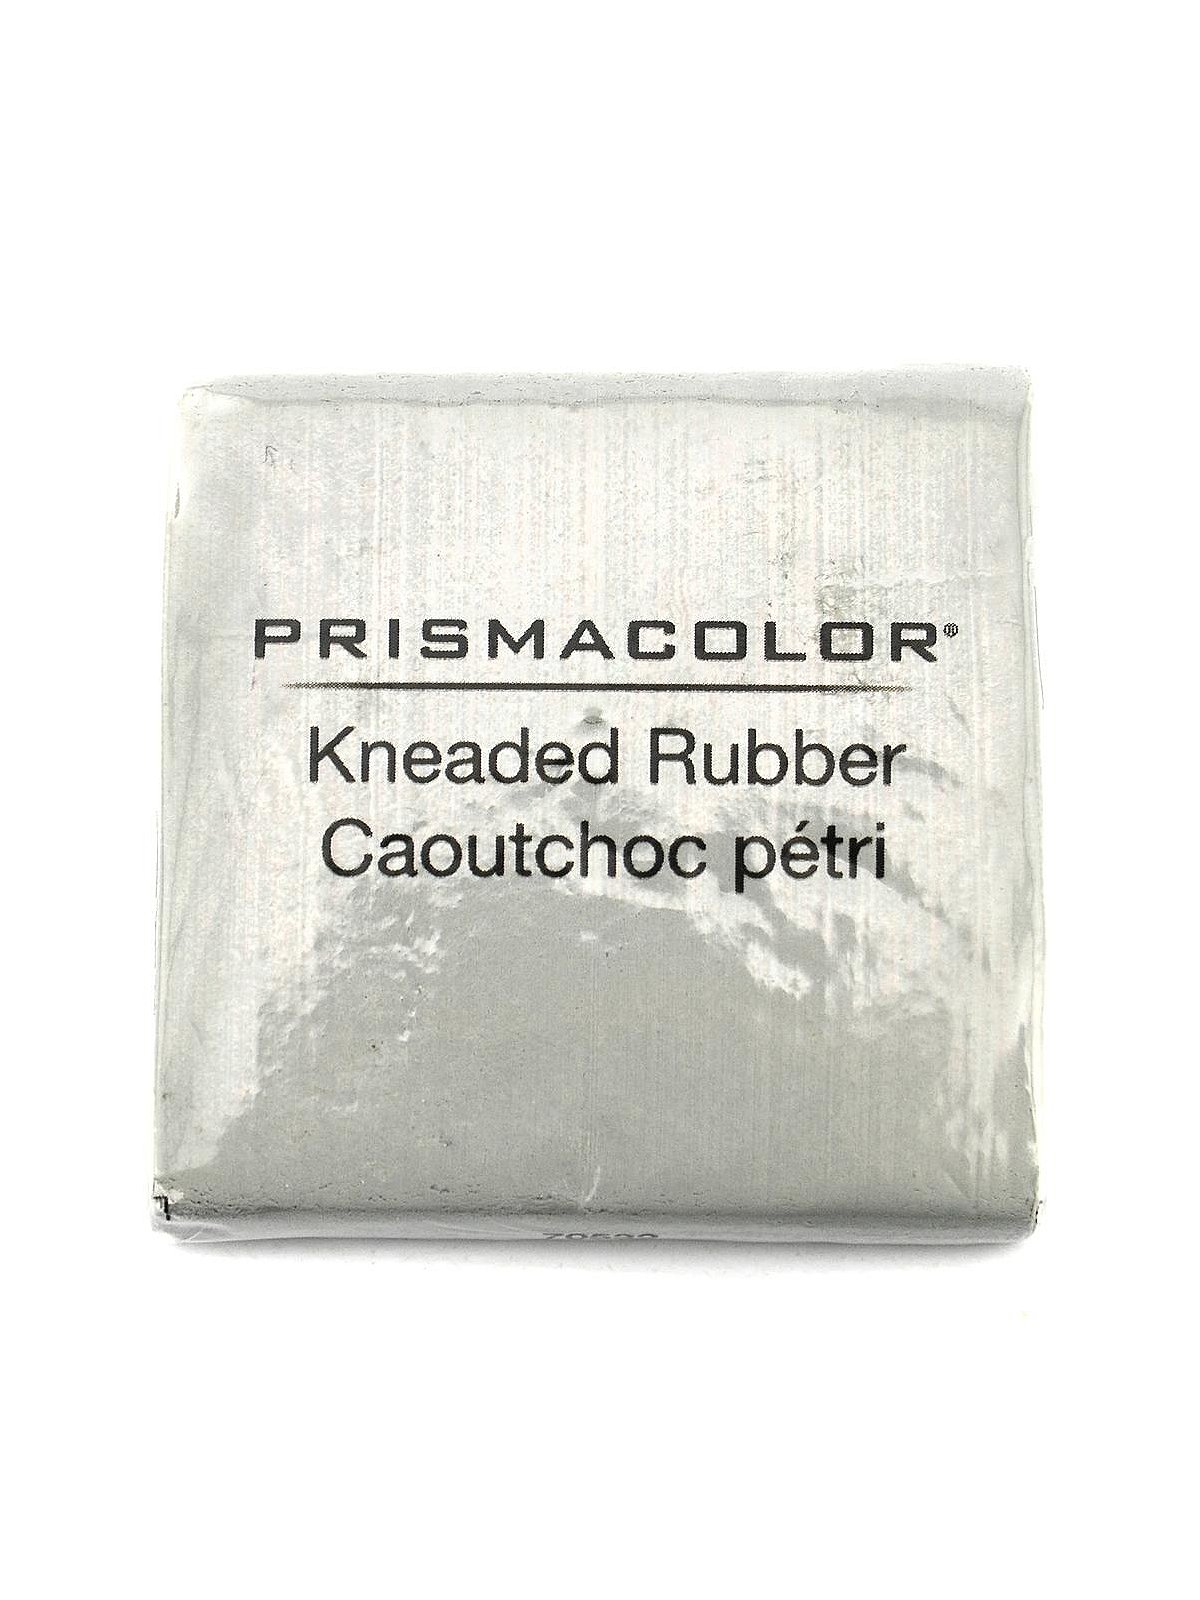 Prismacolor Kneaded Rubber Erasers